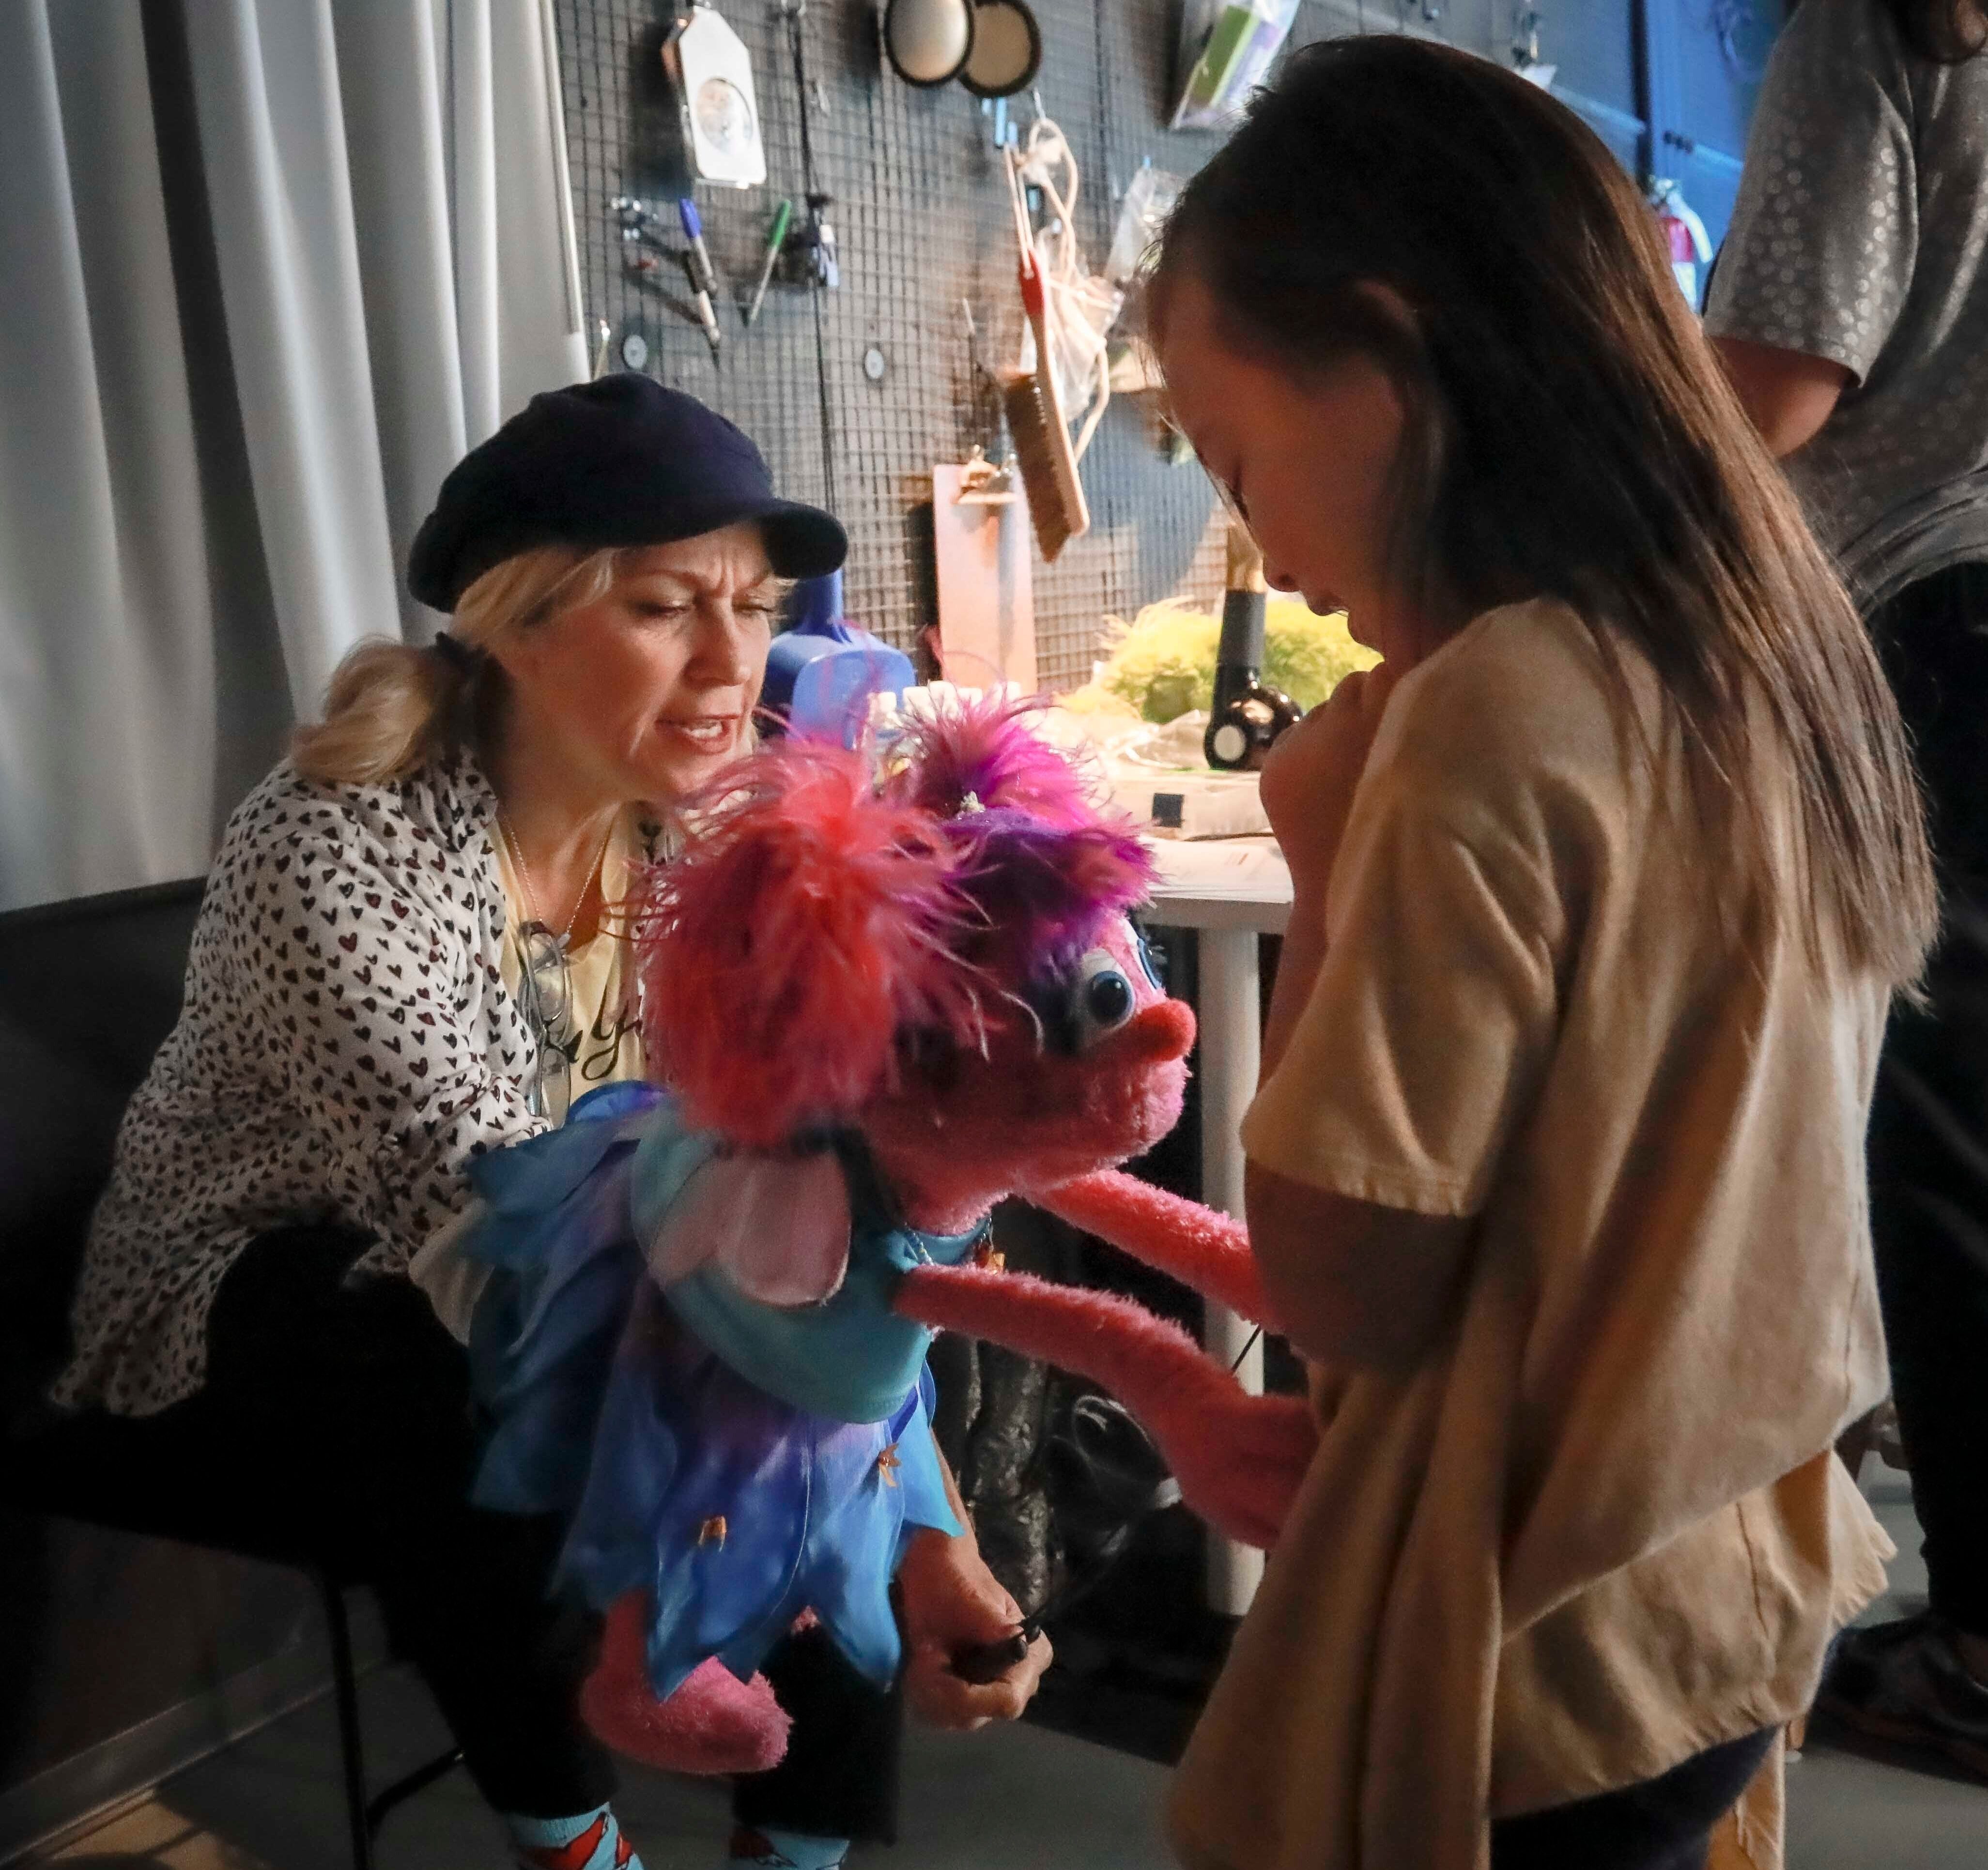 Mandatory Credit: Photo by Bebeto Matthews/AP/Shutterstock (10465504c) Puppeteer Leslie Carrara-Rudolph, left, performs her muppet "Abby Cadabby" for Kya Woodbury, 6, right, from Irvine, Calif., during a production break for the new Sesame Street Workshop show about parental addiction, "Sesame Street In Communities,", in New York. Kya's older sister Salia is featured in the new program, where she experiences of their parents struggle with addiction and recovery Sesame Street in Communities, New York, USA - 06 Aug 2019